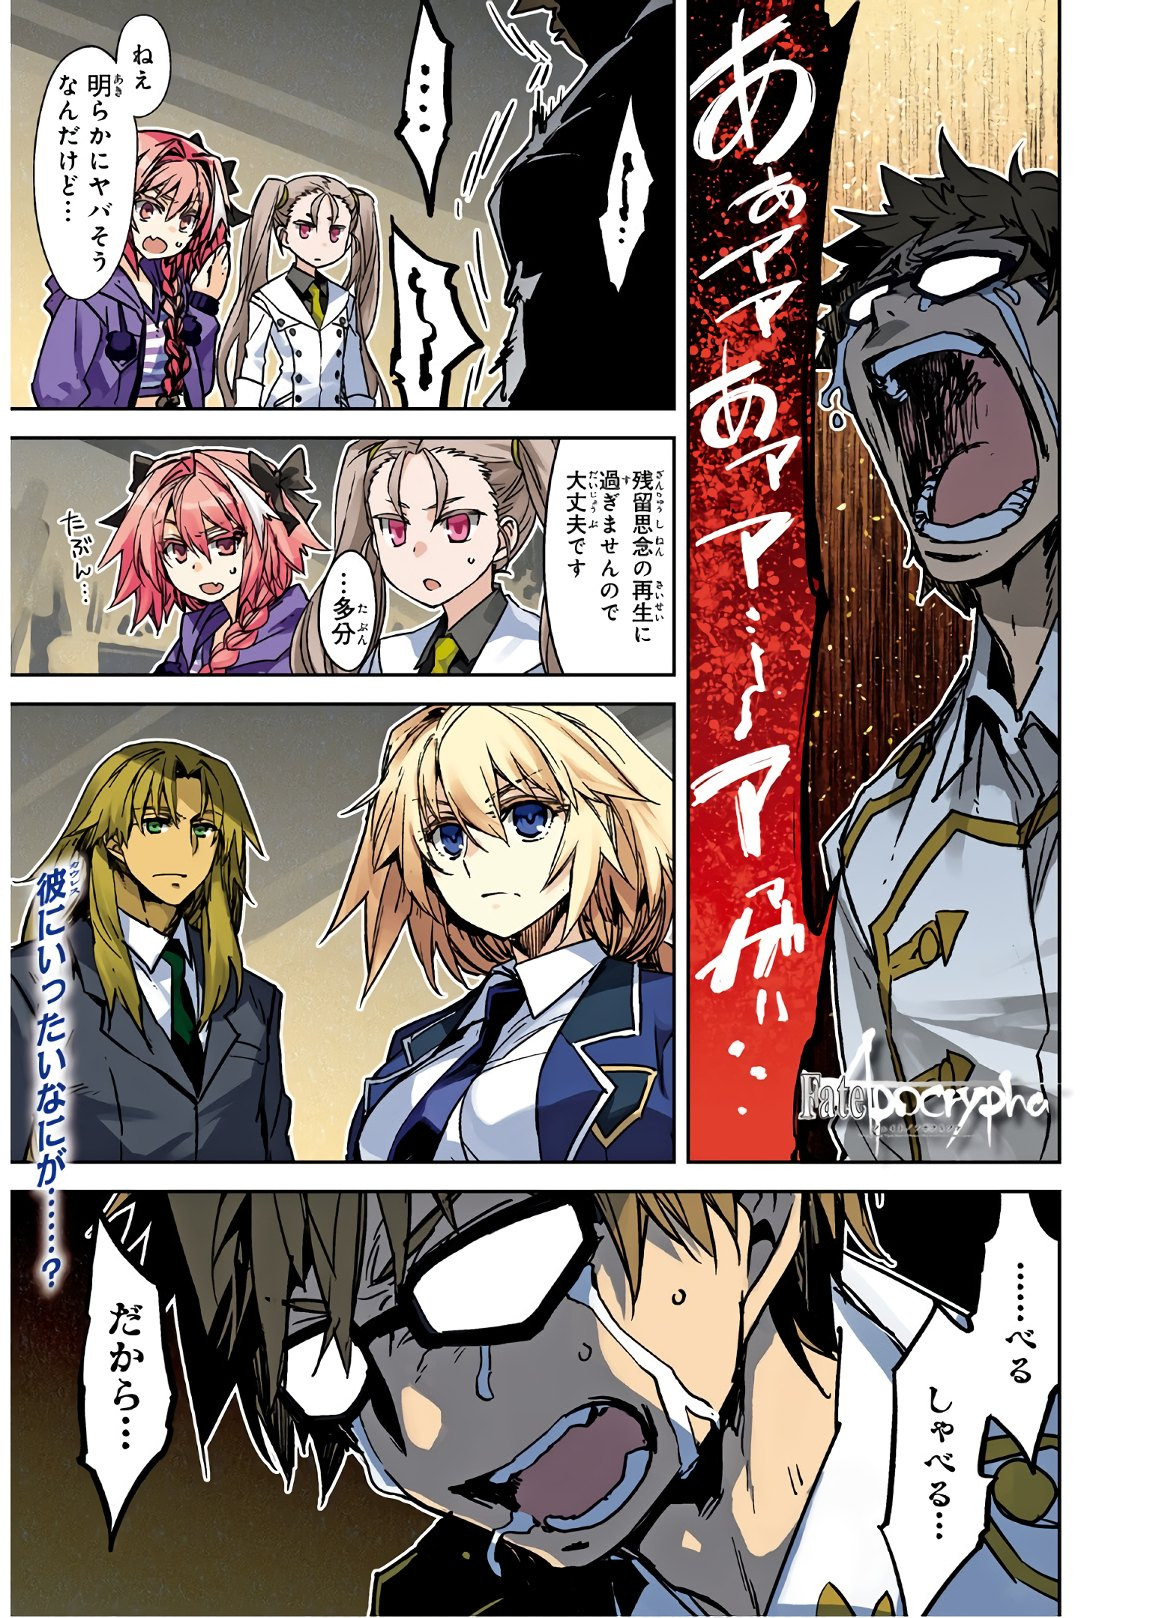 Fate-Apocrypha - Chapter 44 - Page 1